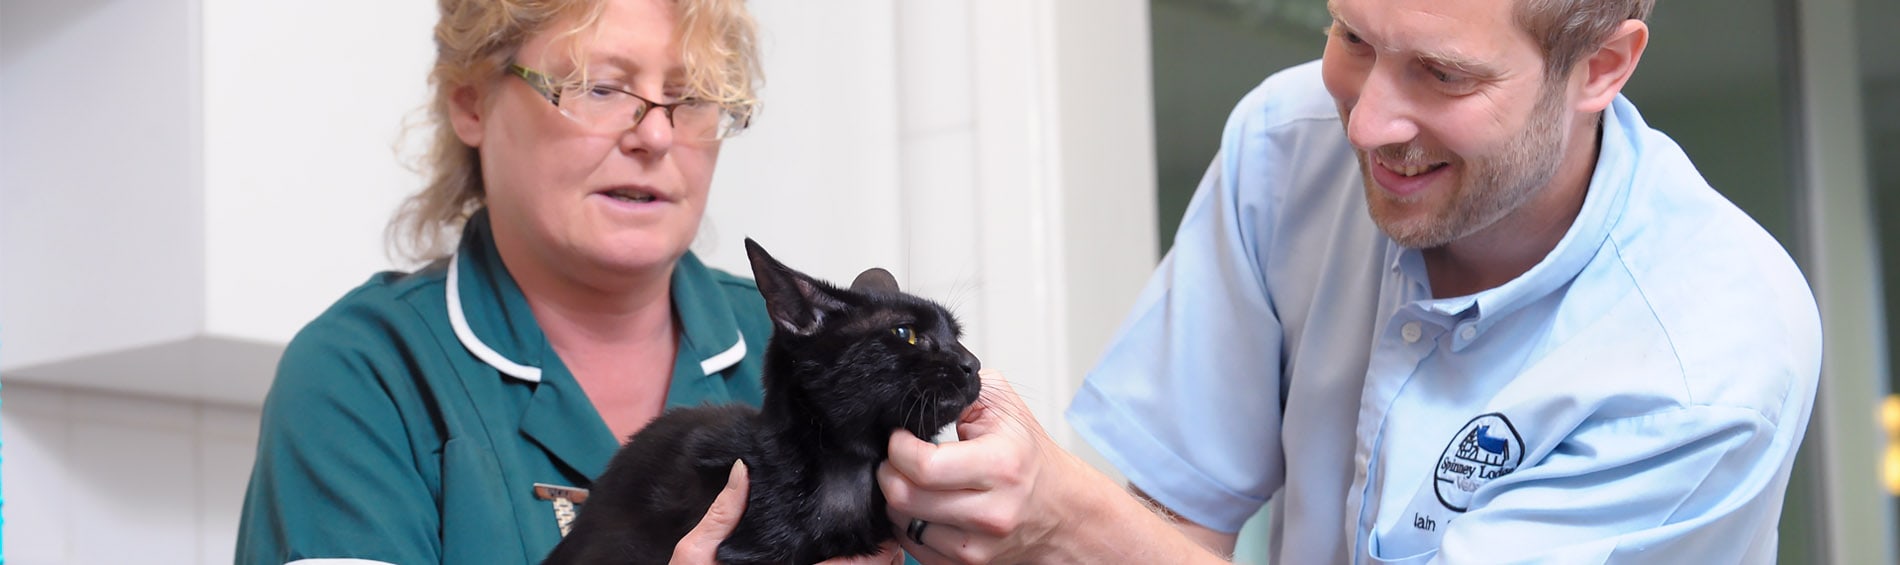 Dietary Advice for Cats | Spinney Vets